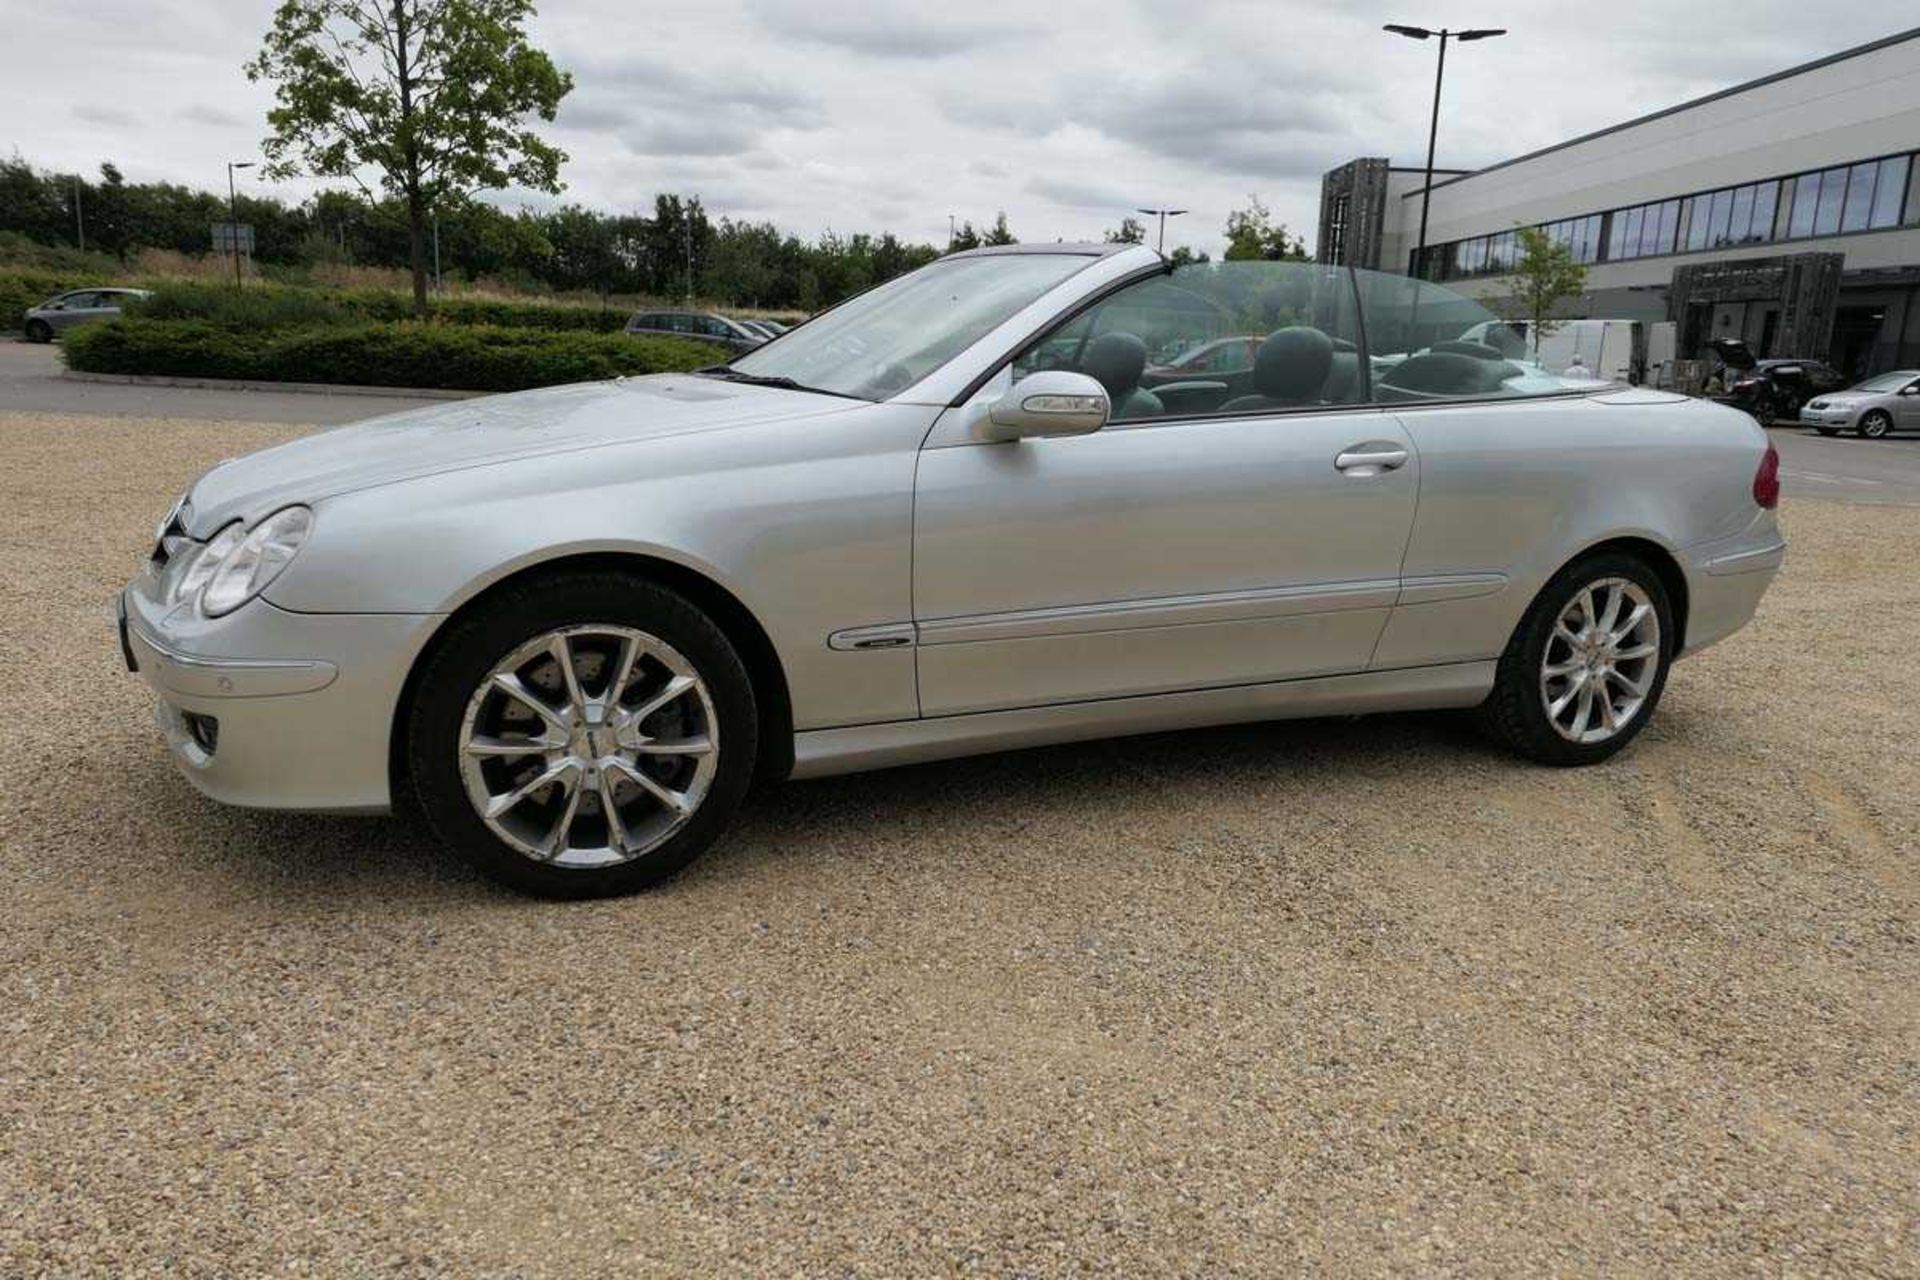 BK57 XKO (2007) Mercedes 350 CLK two door convertible in silver, 3.5L petrol automatic, mileage - Image 3 of 14